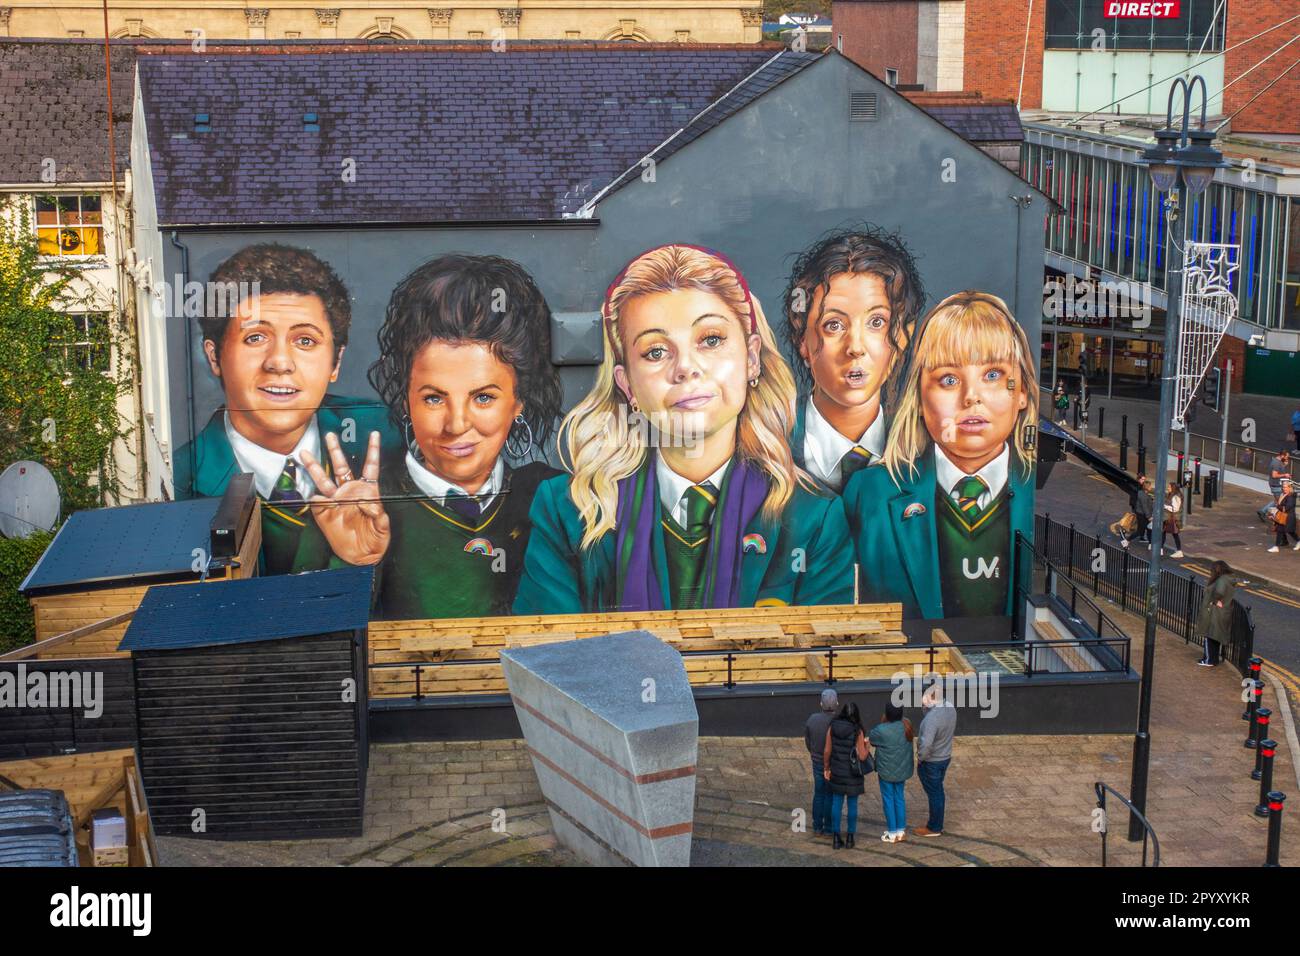 Derry Girls Mural viewed from the old city walls in Derry / Londonderry, Northern Ireland, UK Stock Photo